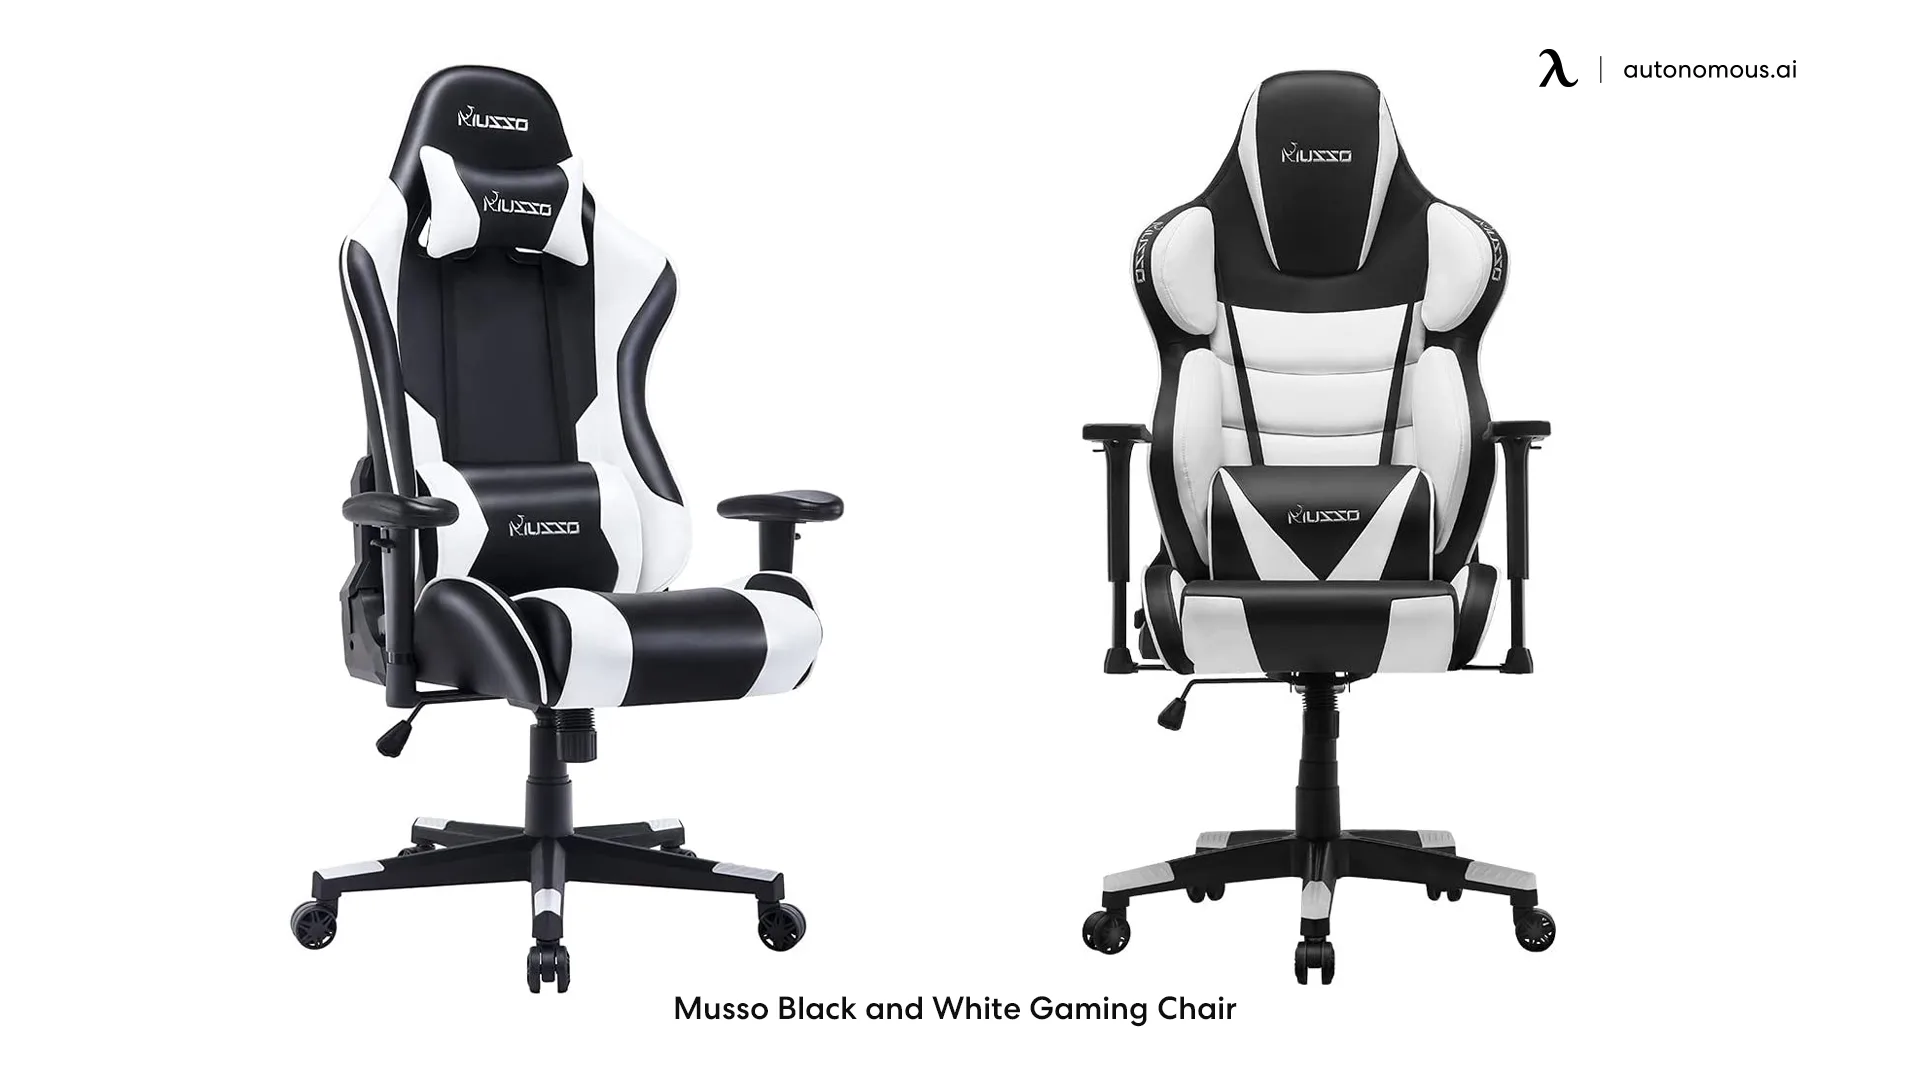 Musso Black and White Gaming Chair